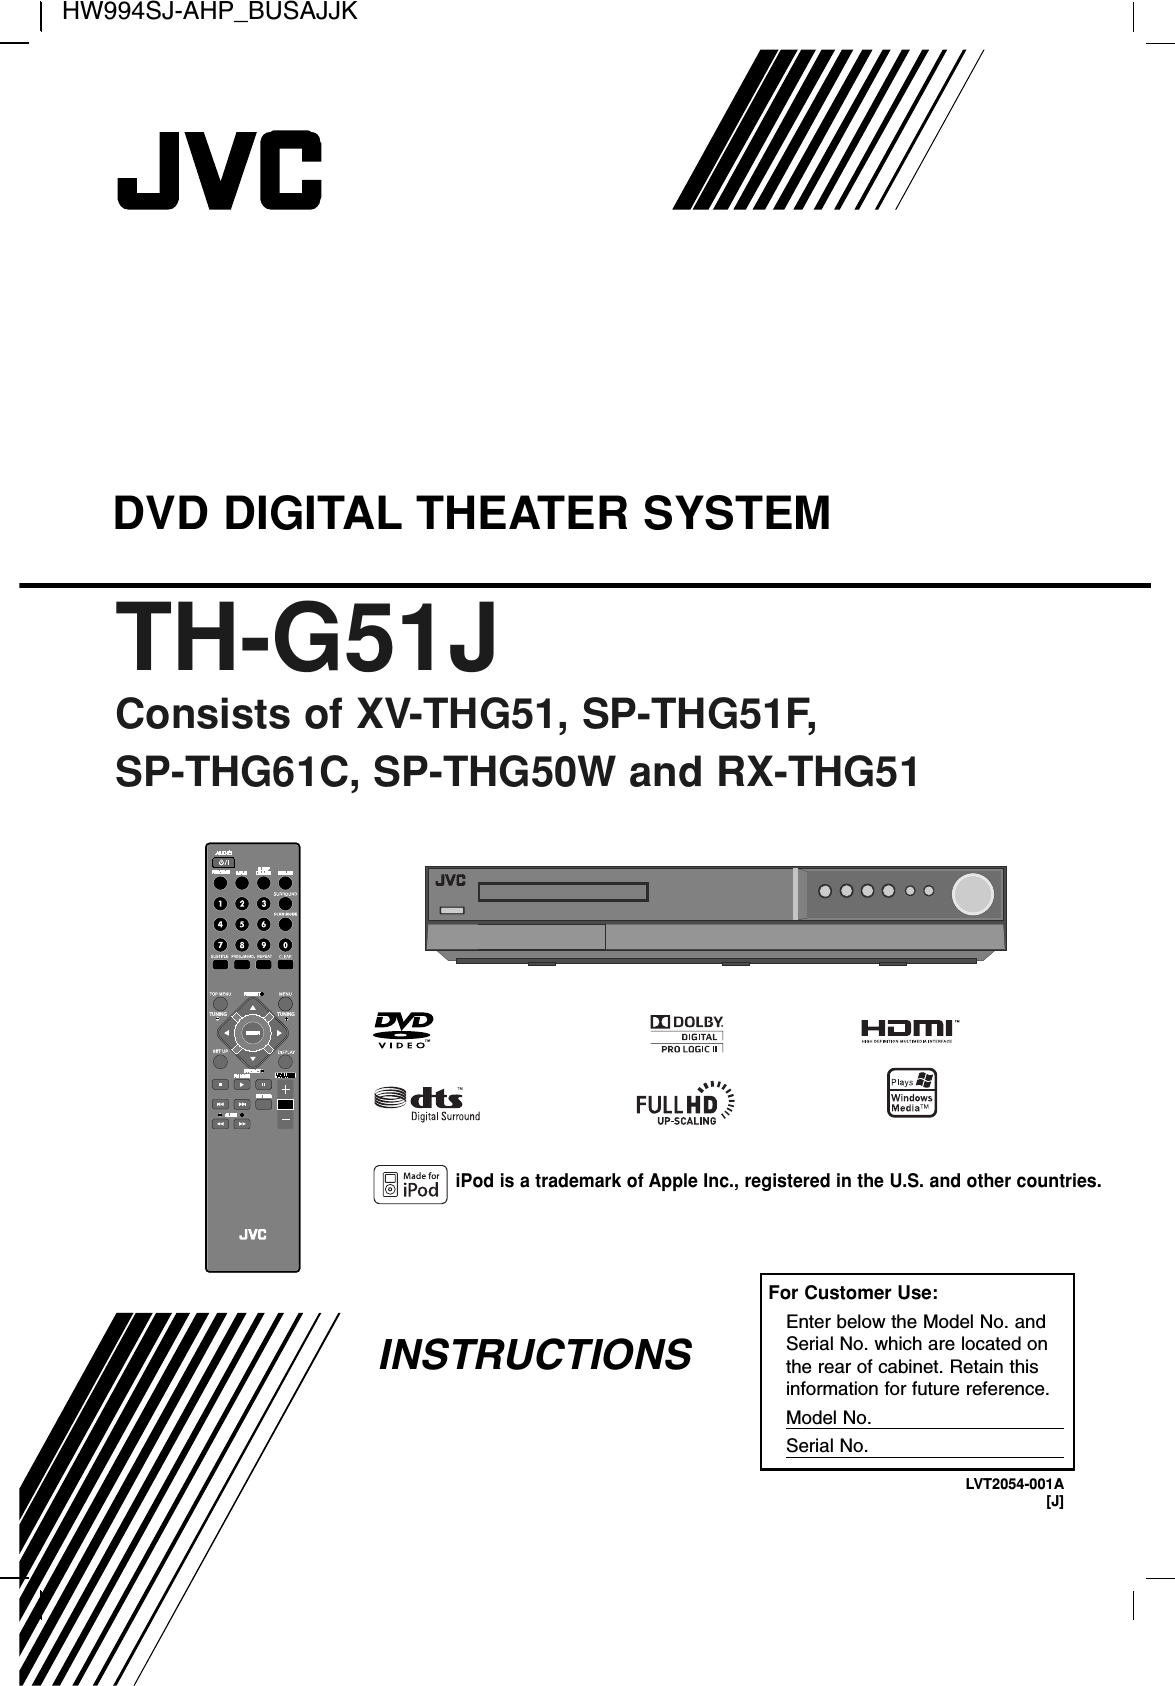 TH-G51JConsists of XV-THG51, SP-THG51F, SP-THG61C, SP-THG50W and RX-THG51DVD DIGITAL THEATER SYSTEMINSTRUCTIONSFor Customer Use:Enter below the Model No. andSerial No. which are located onthe rear of cabinet. Retain thisinformation for future reference.Model No.Serial No.LVT2054-001A[J]HW994SJ-AHP_BUSAJJKTUNING TUNINGiPod is a trademark of Apple Inc., registered in the U.S. and other countries.